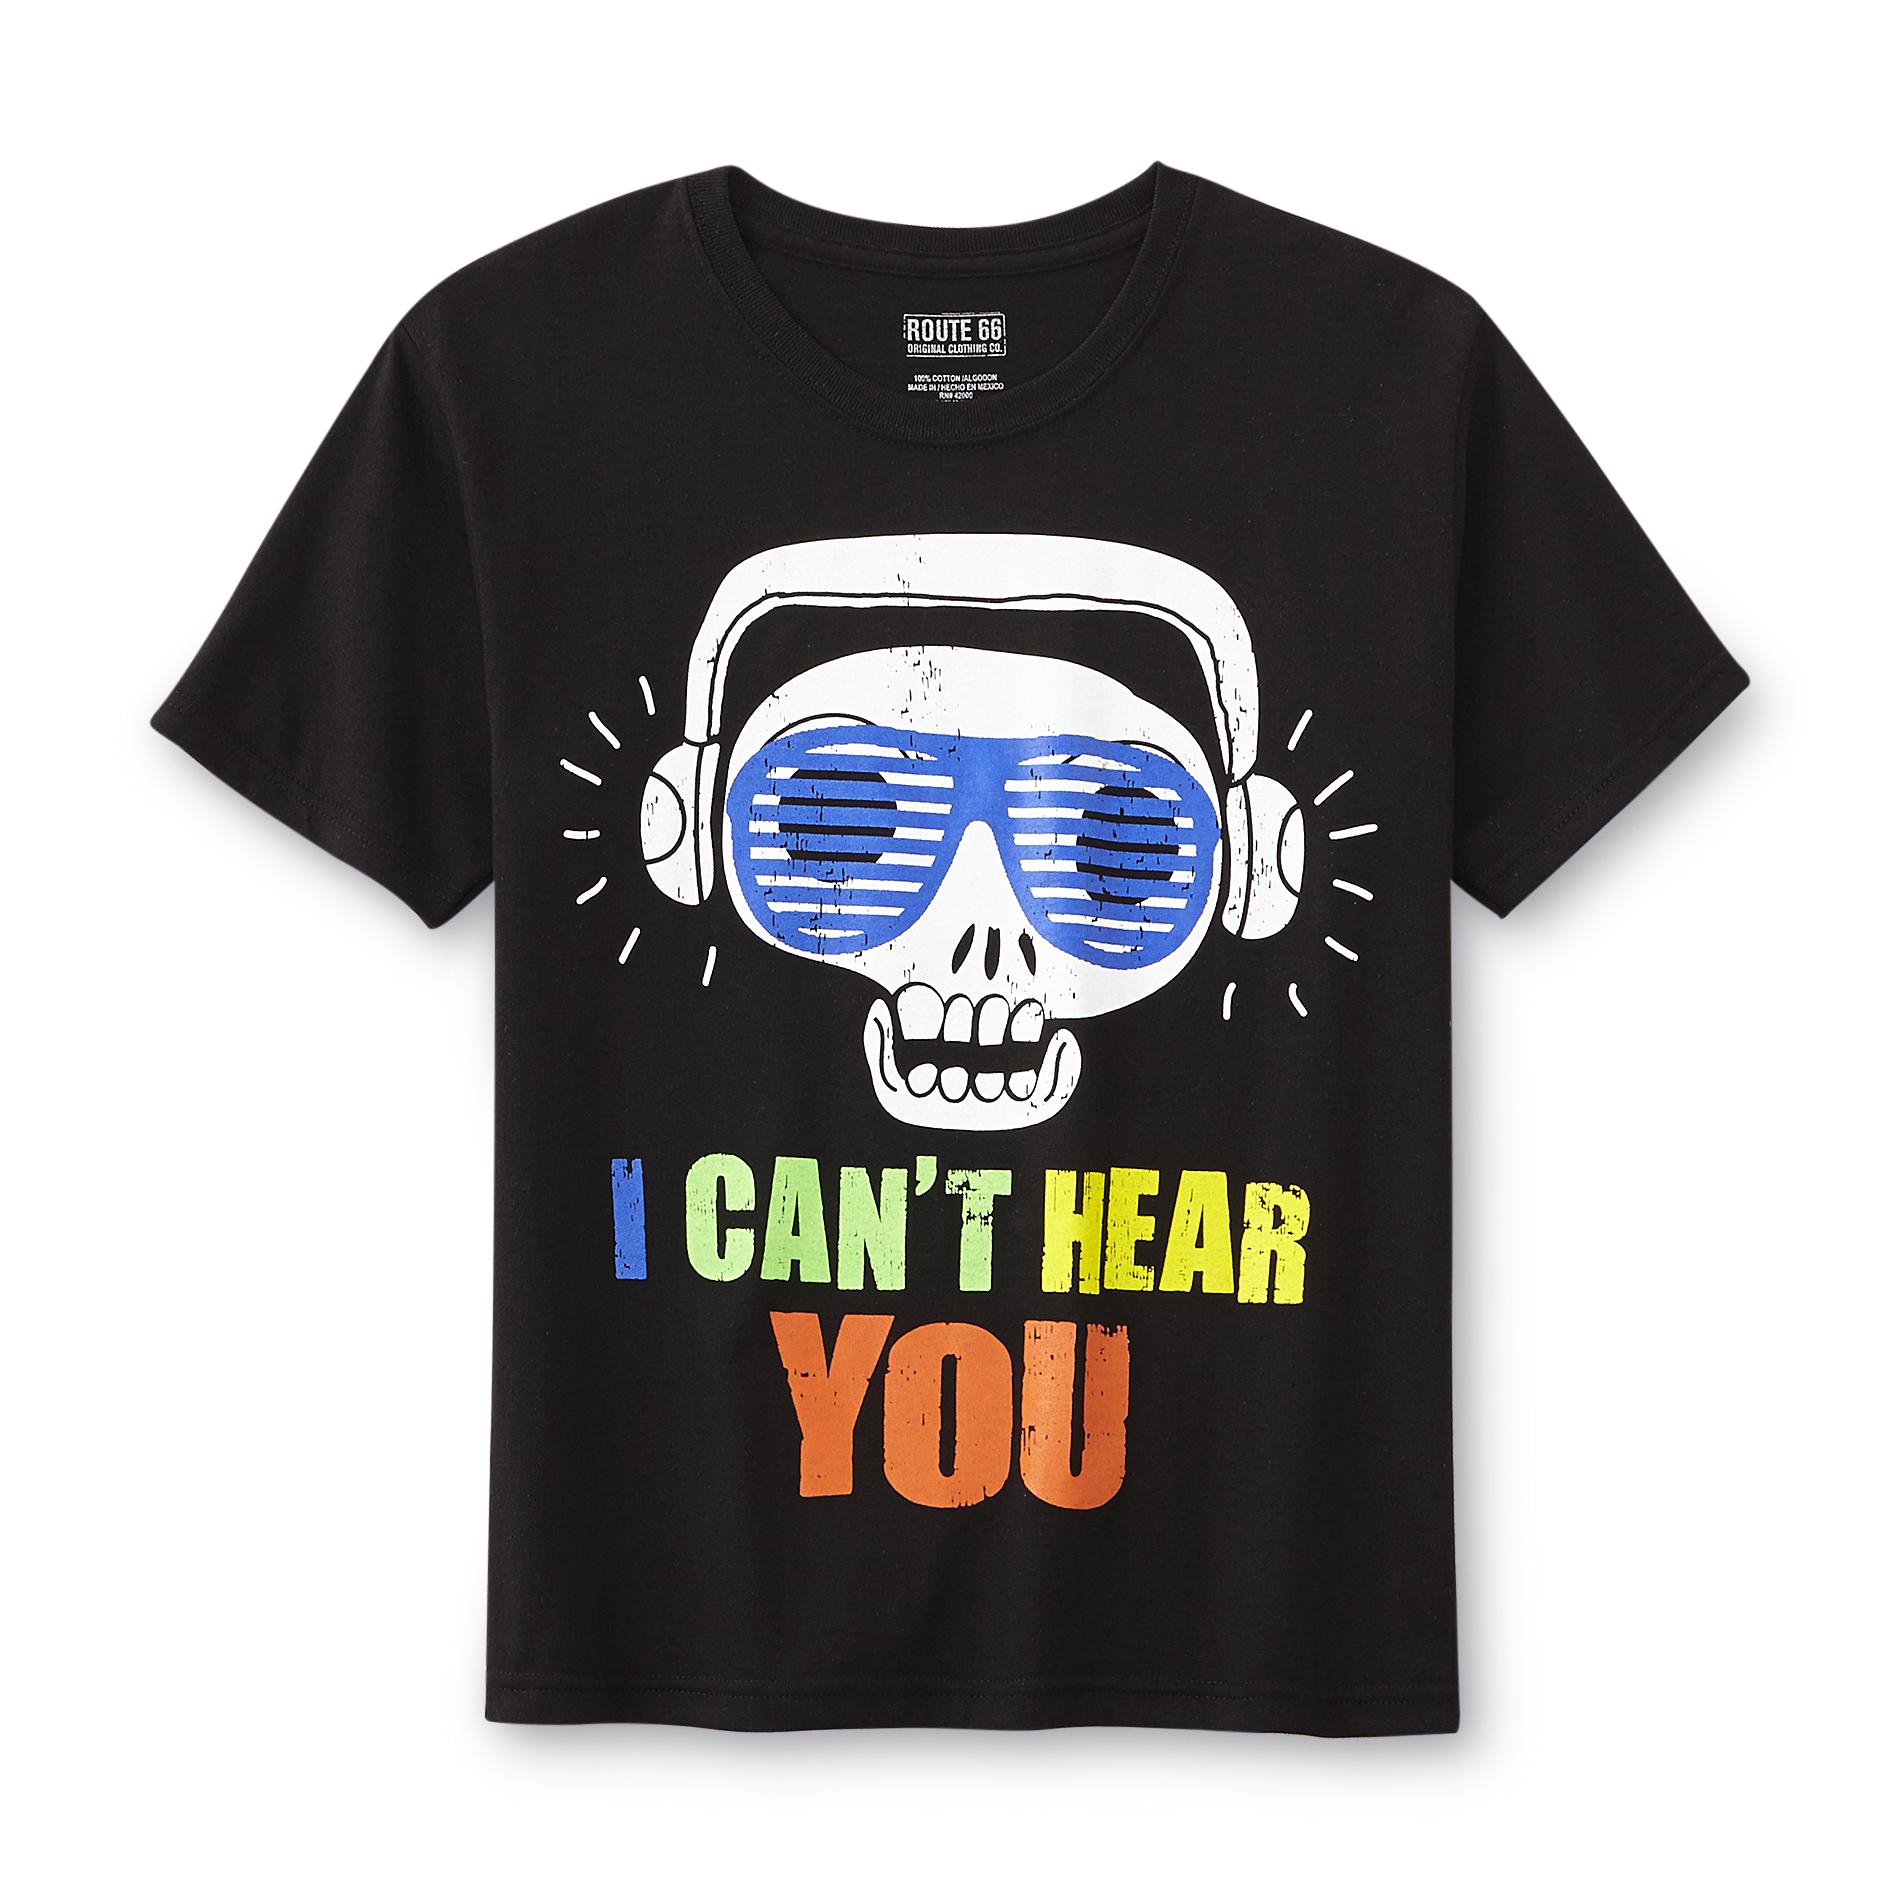 Boy's Graphic T-Shirt - I Can't Hear You